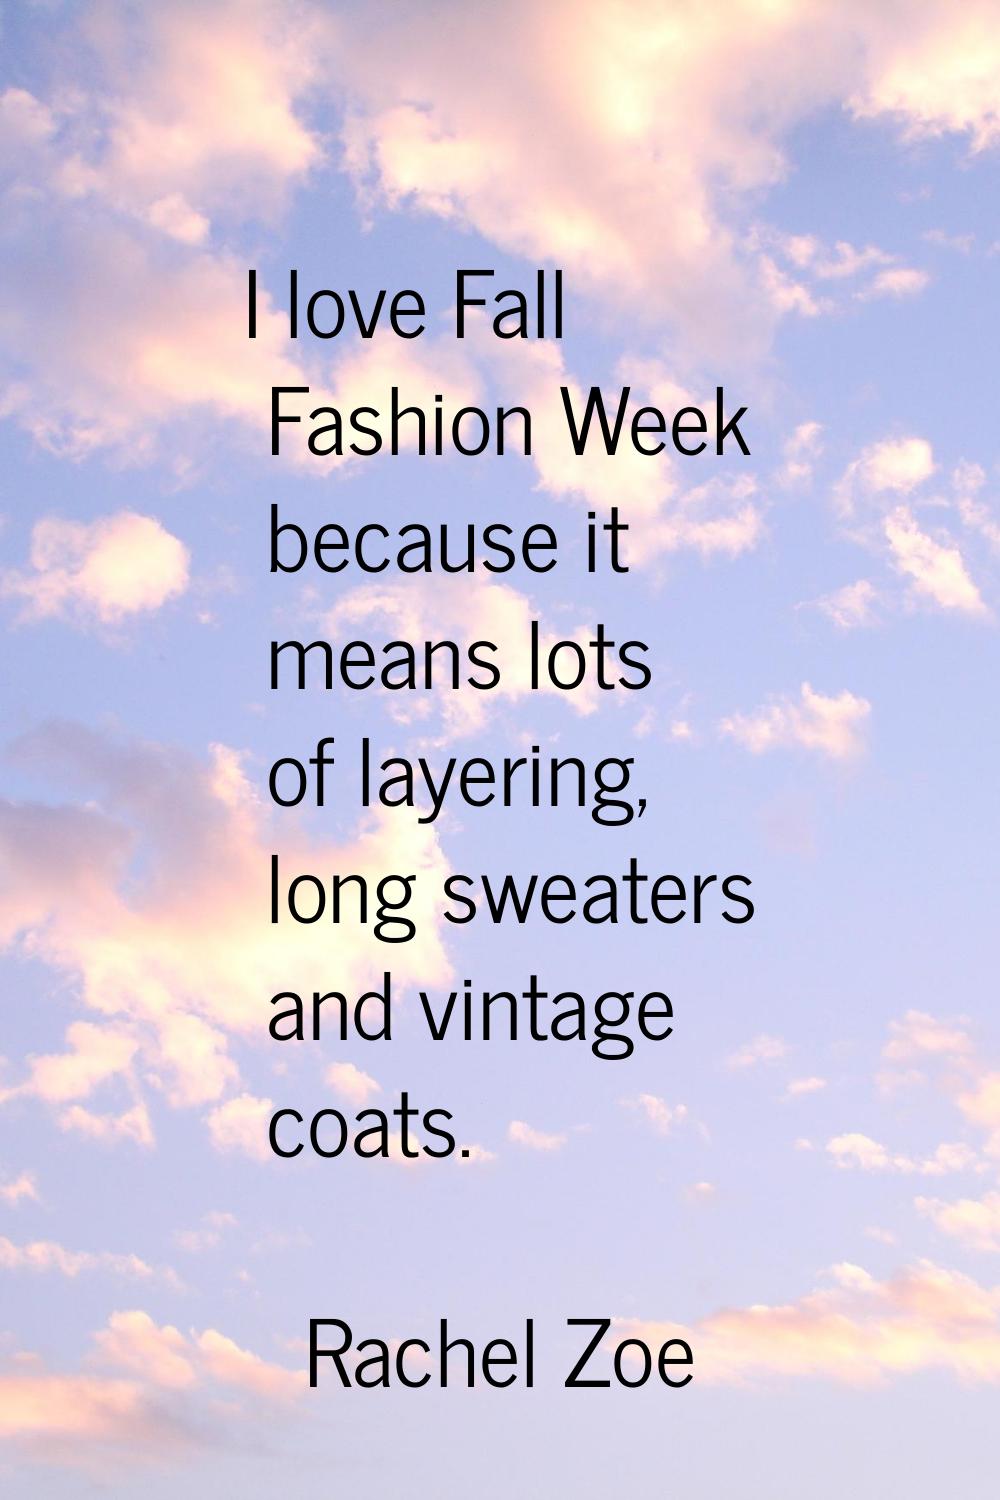 I love Fall Fashion Week because it means lots of layering, long sweaters and vintage coats.